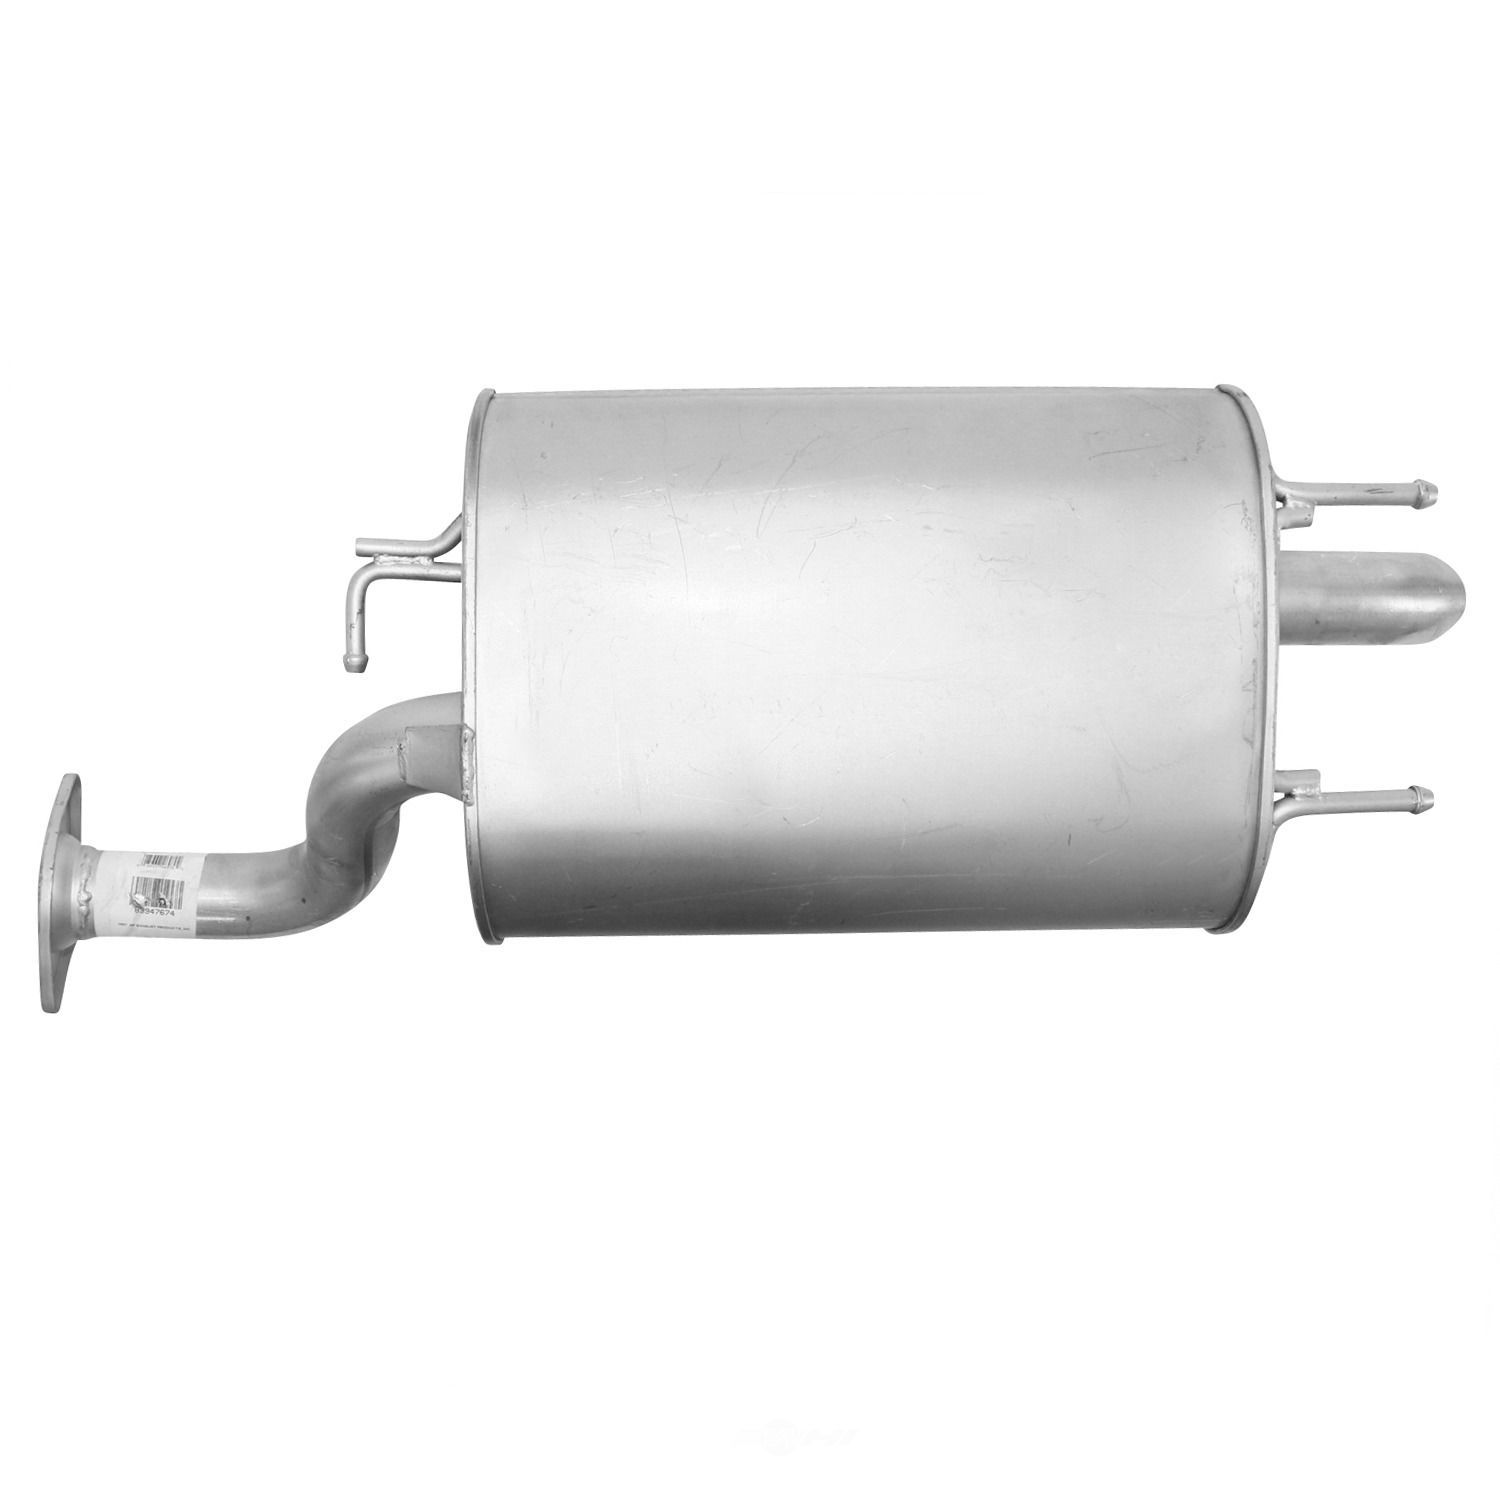 AP EXHAUST W/FEDERAL CONVERTER - Welded Assembly (Rear) - APF 7099